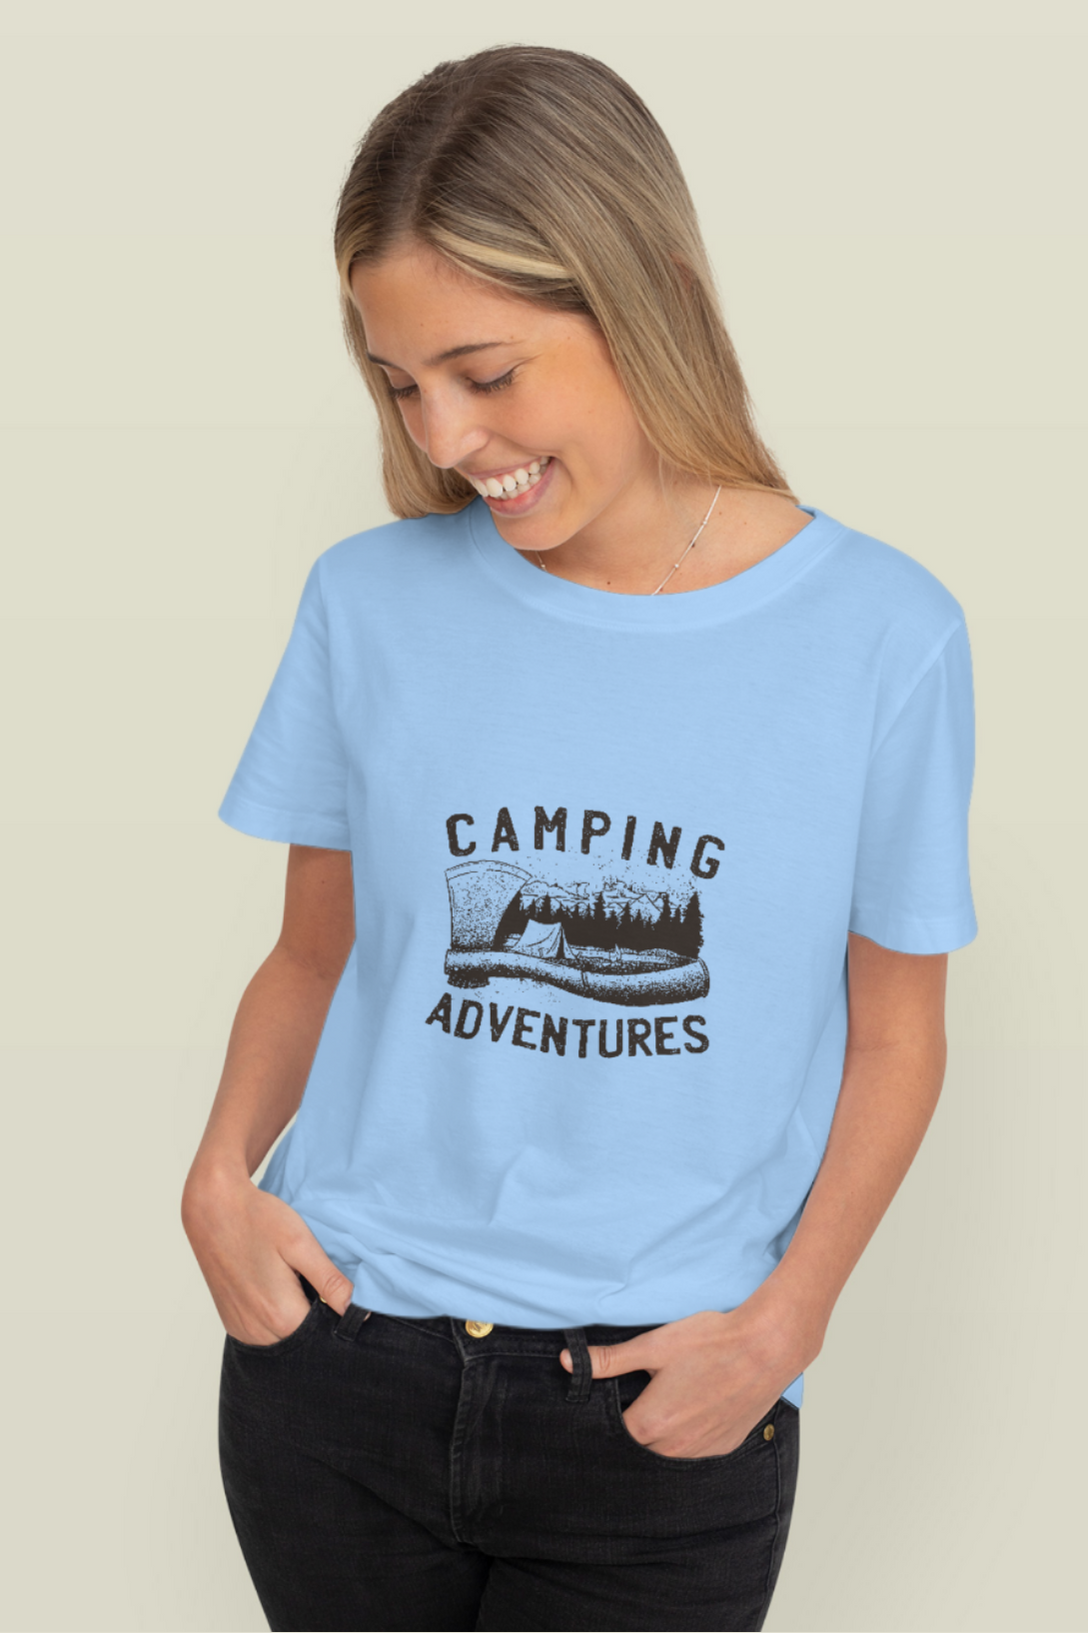 Camping Adventures Printed T-Shirt For Women - WowWaves - 9